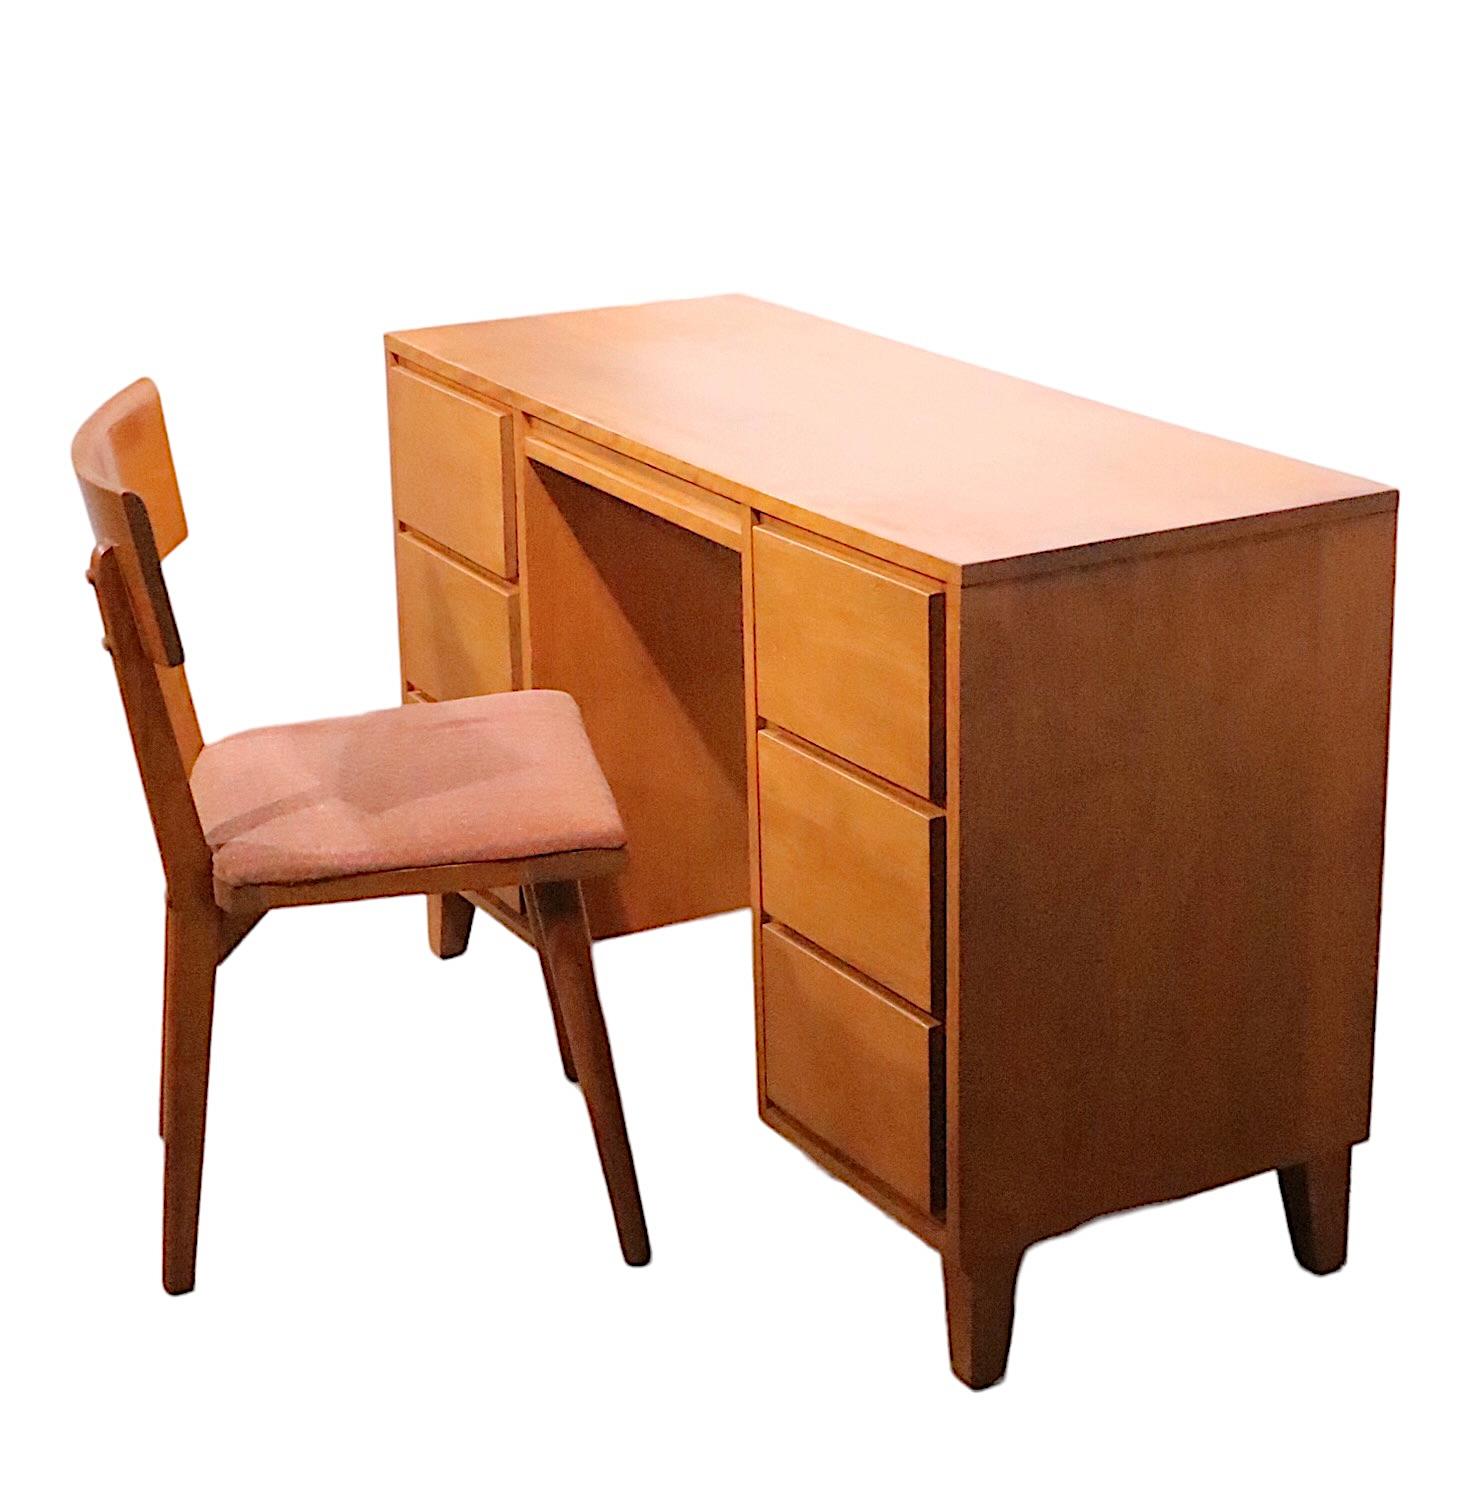 1950's Mid Century Desk and Chair Conant Ball  Modern Mates by Leslie Diamond   For Sale 4